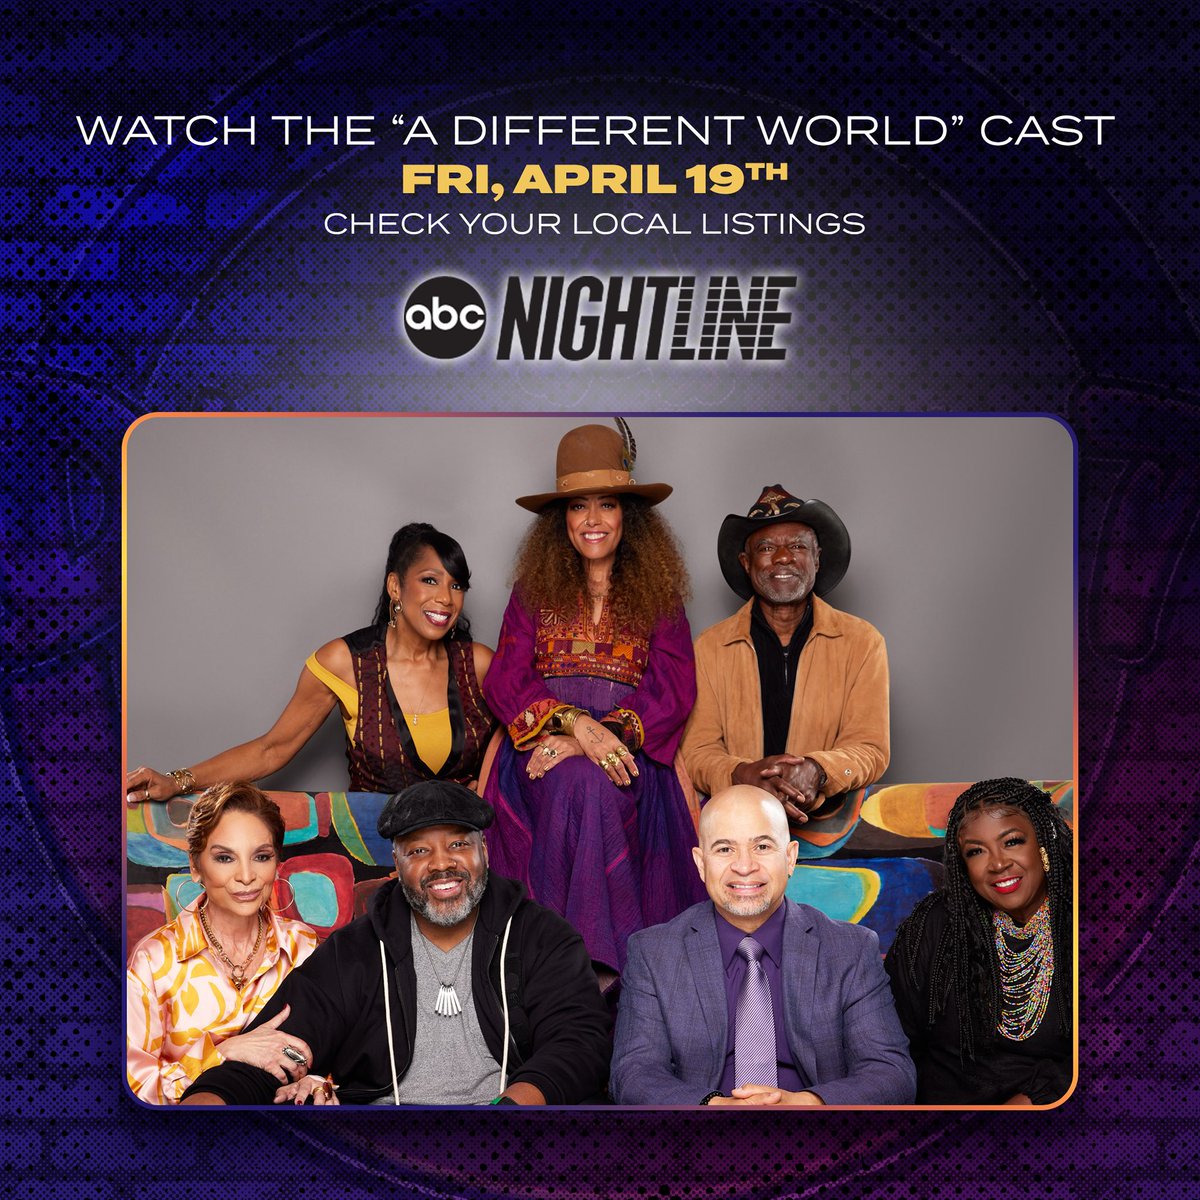 Tune in tonight to catch the cast on @nightline as they delve into the Tour, reflect on 35+ years of impact, and share their Hillman College memories. Don’t miss it! Check your local listings. #HillmanOnNightline #adwtour